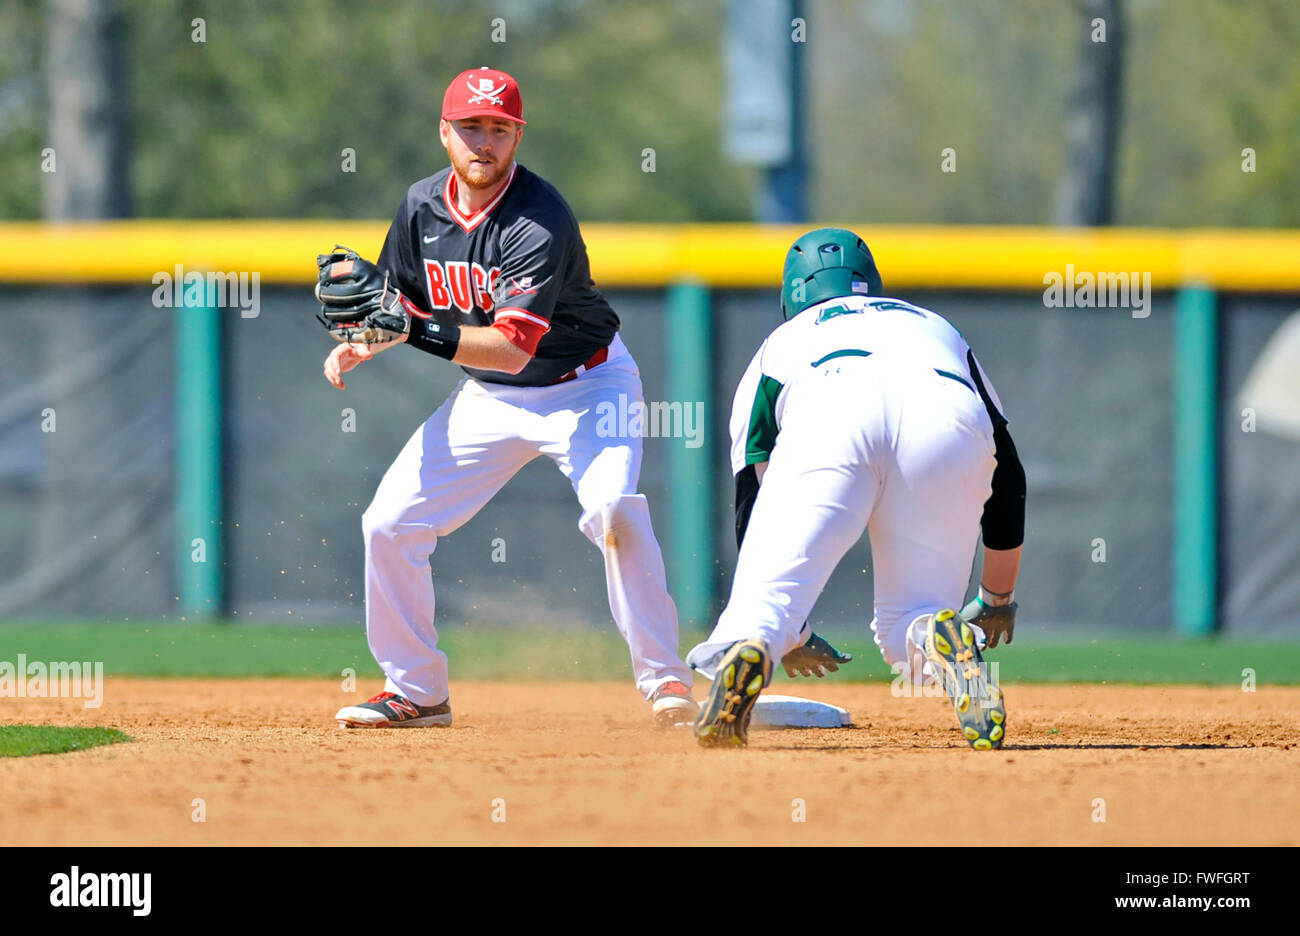 Cleveland, MS, USA. 03rd Apr, 2016. Christian Brothers second baseman Lucas Castleberry (left) looks to tag out a Delta State runner during the sixth inning of an NCAA college baseball game between Christian Brothers and Delta State at Dave ''Boo'' Ferriss Field in Cleveland, MS. Delta State won 10-0 after 7 innings. Austin McAfee/CSM/Alamy Live News Stock Photo